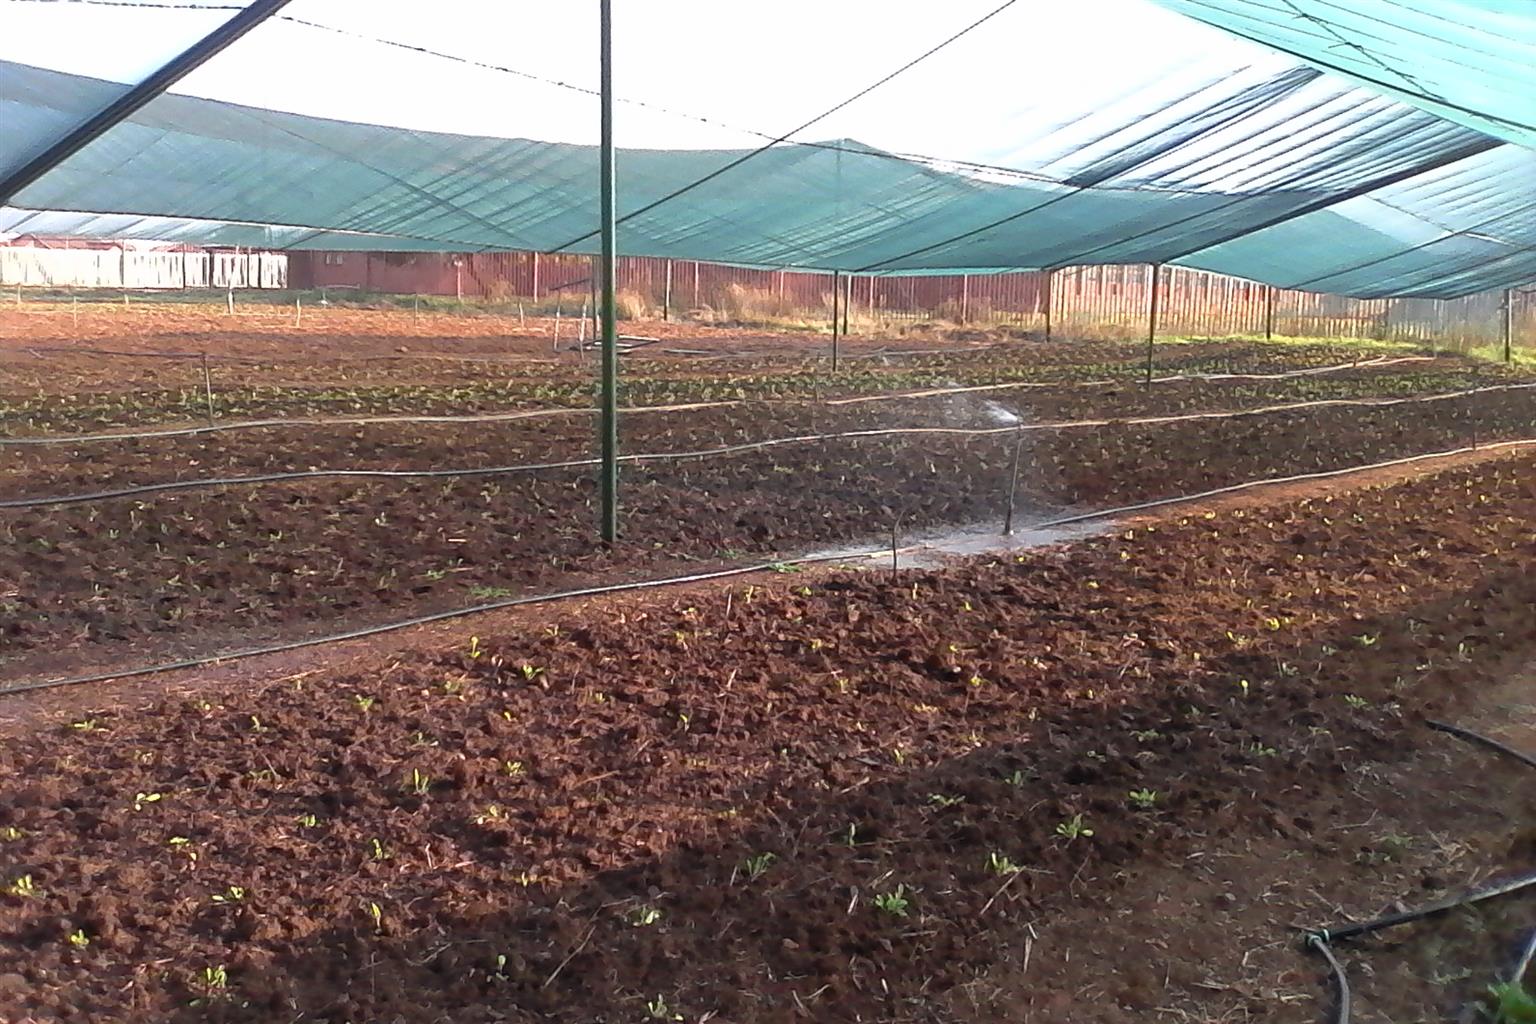 We are selling net shade tunnel for protecting agricultural crops